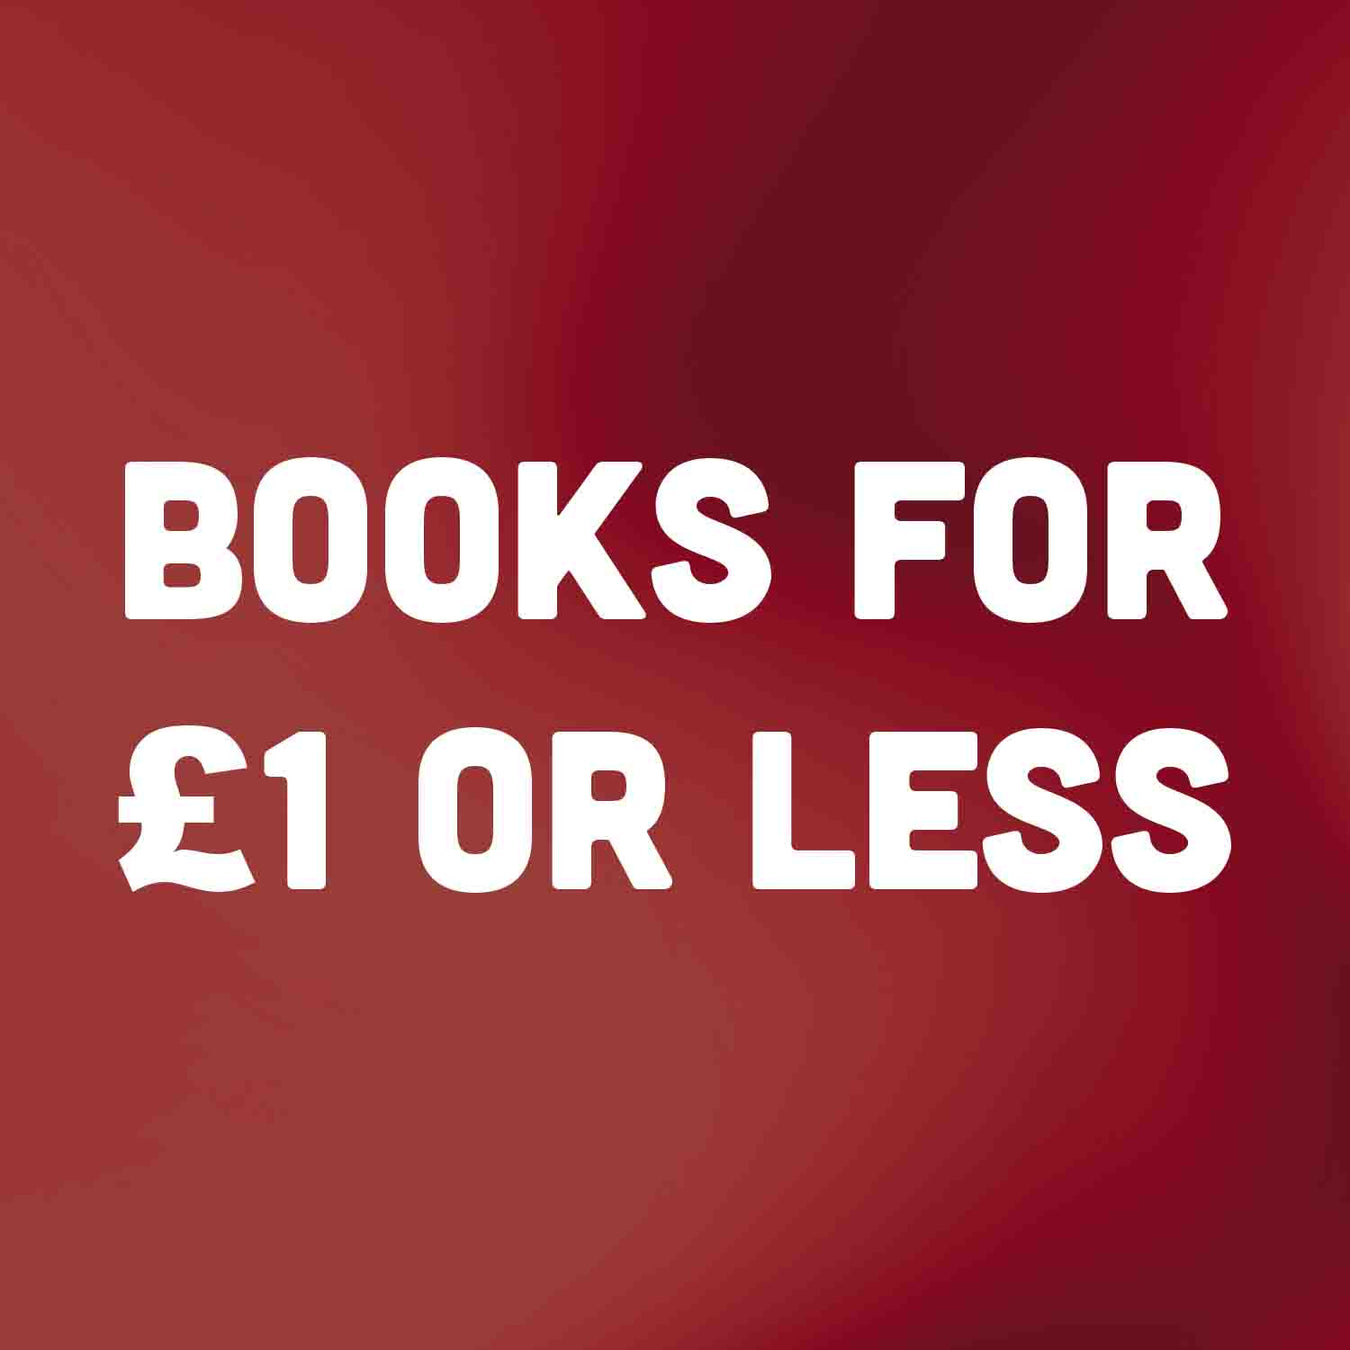 Books for £1 or Less